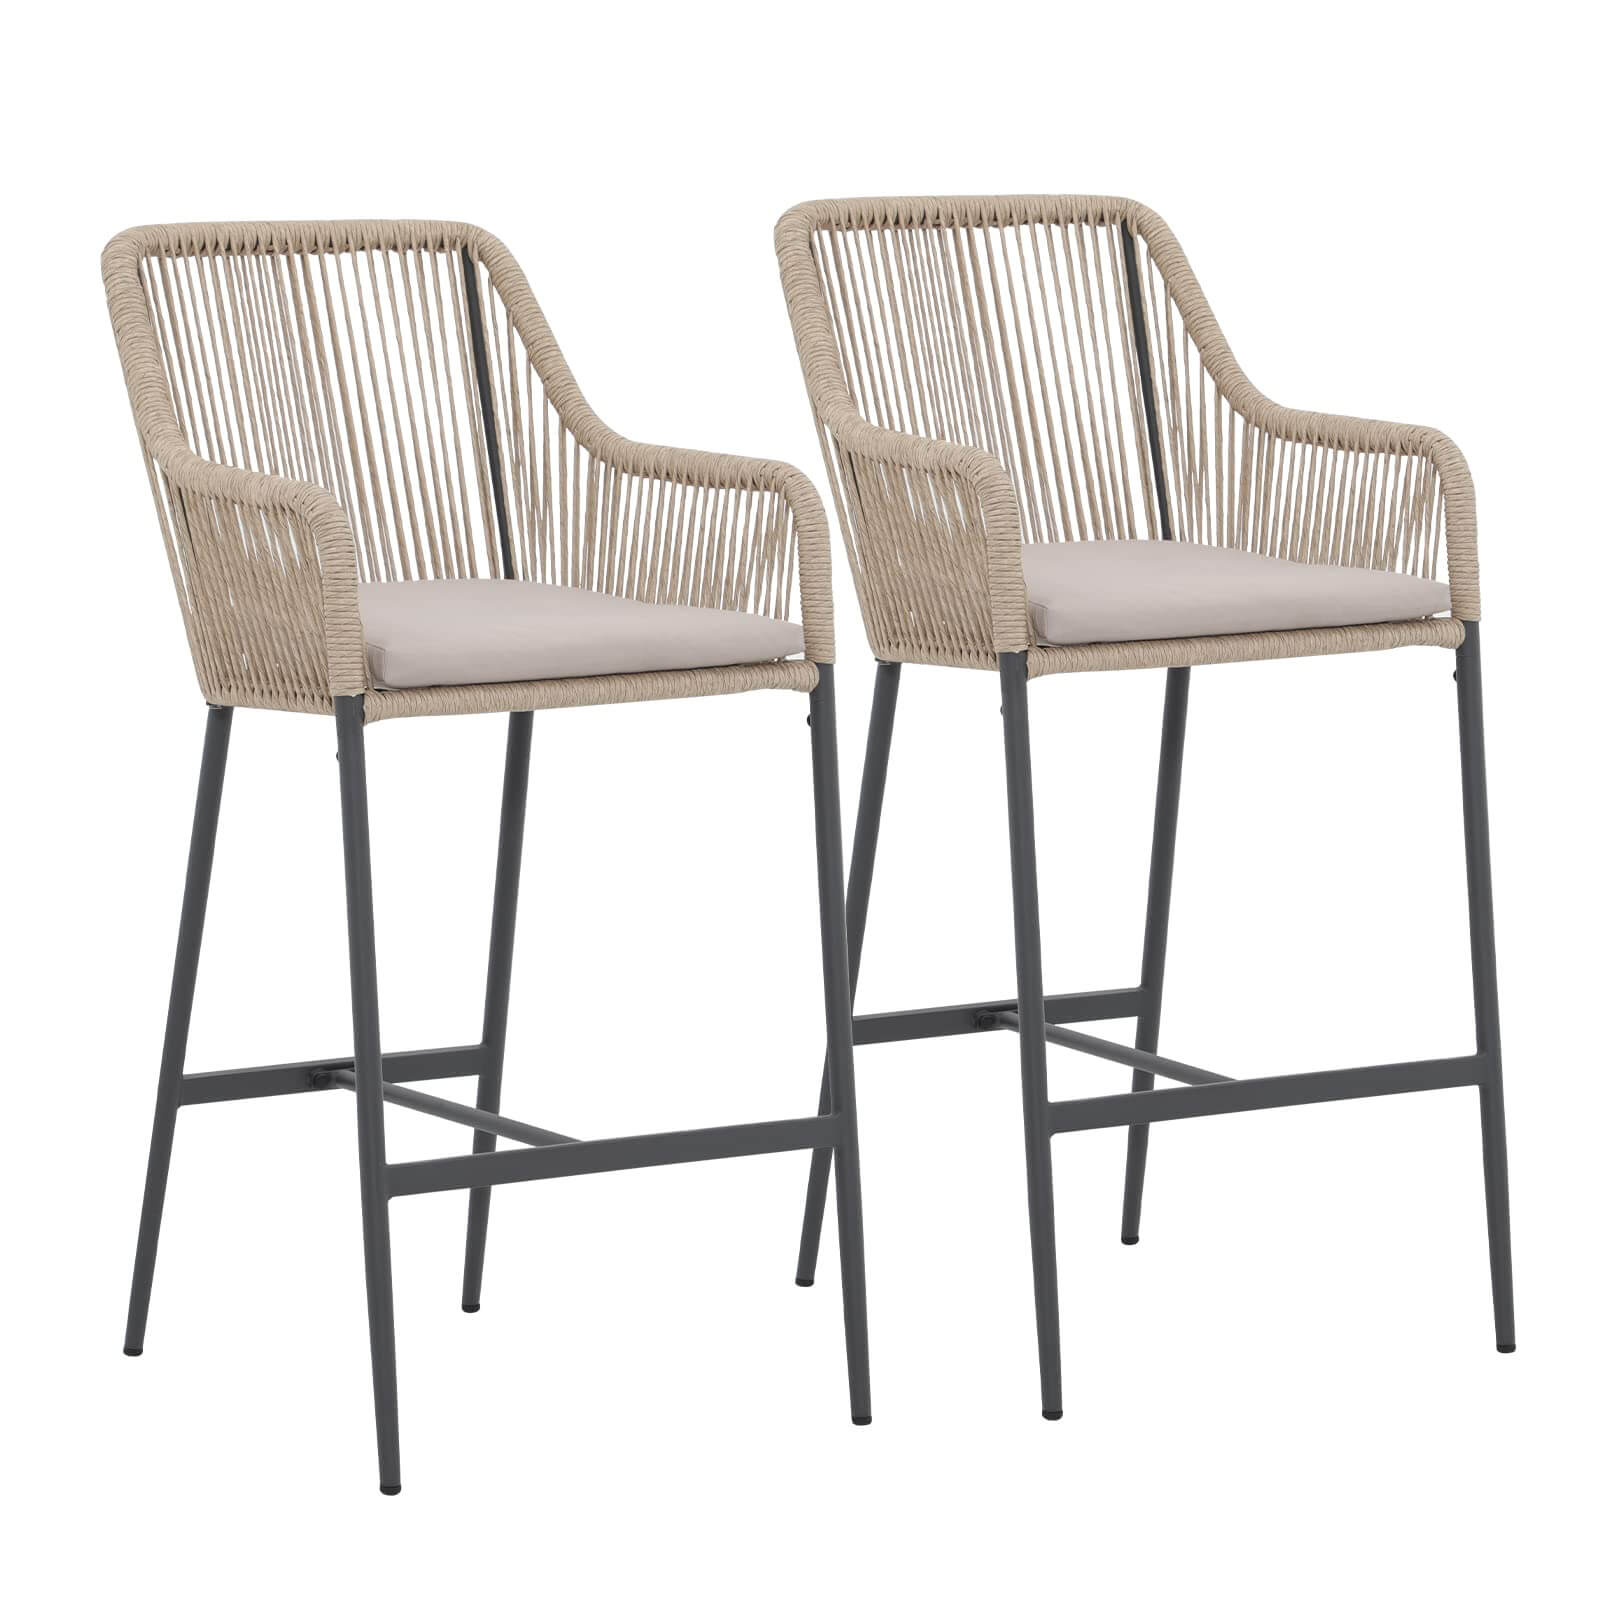 Bar Stools Set of 2, Patio Outdoor Rattan Bar Height Chairs with Cushions